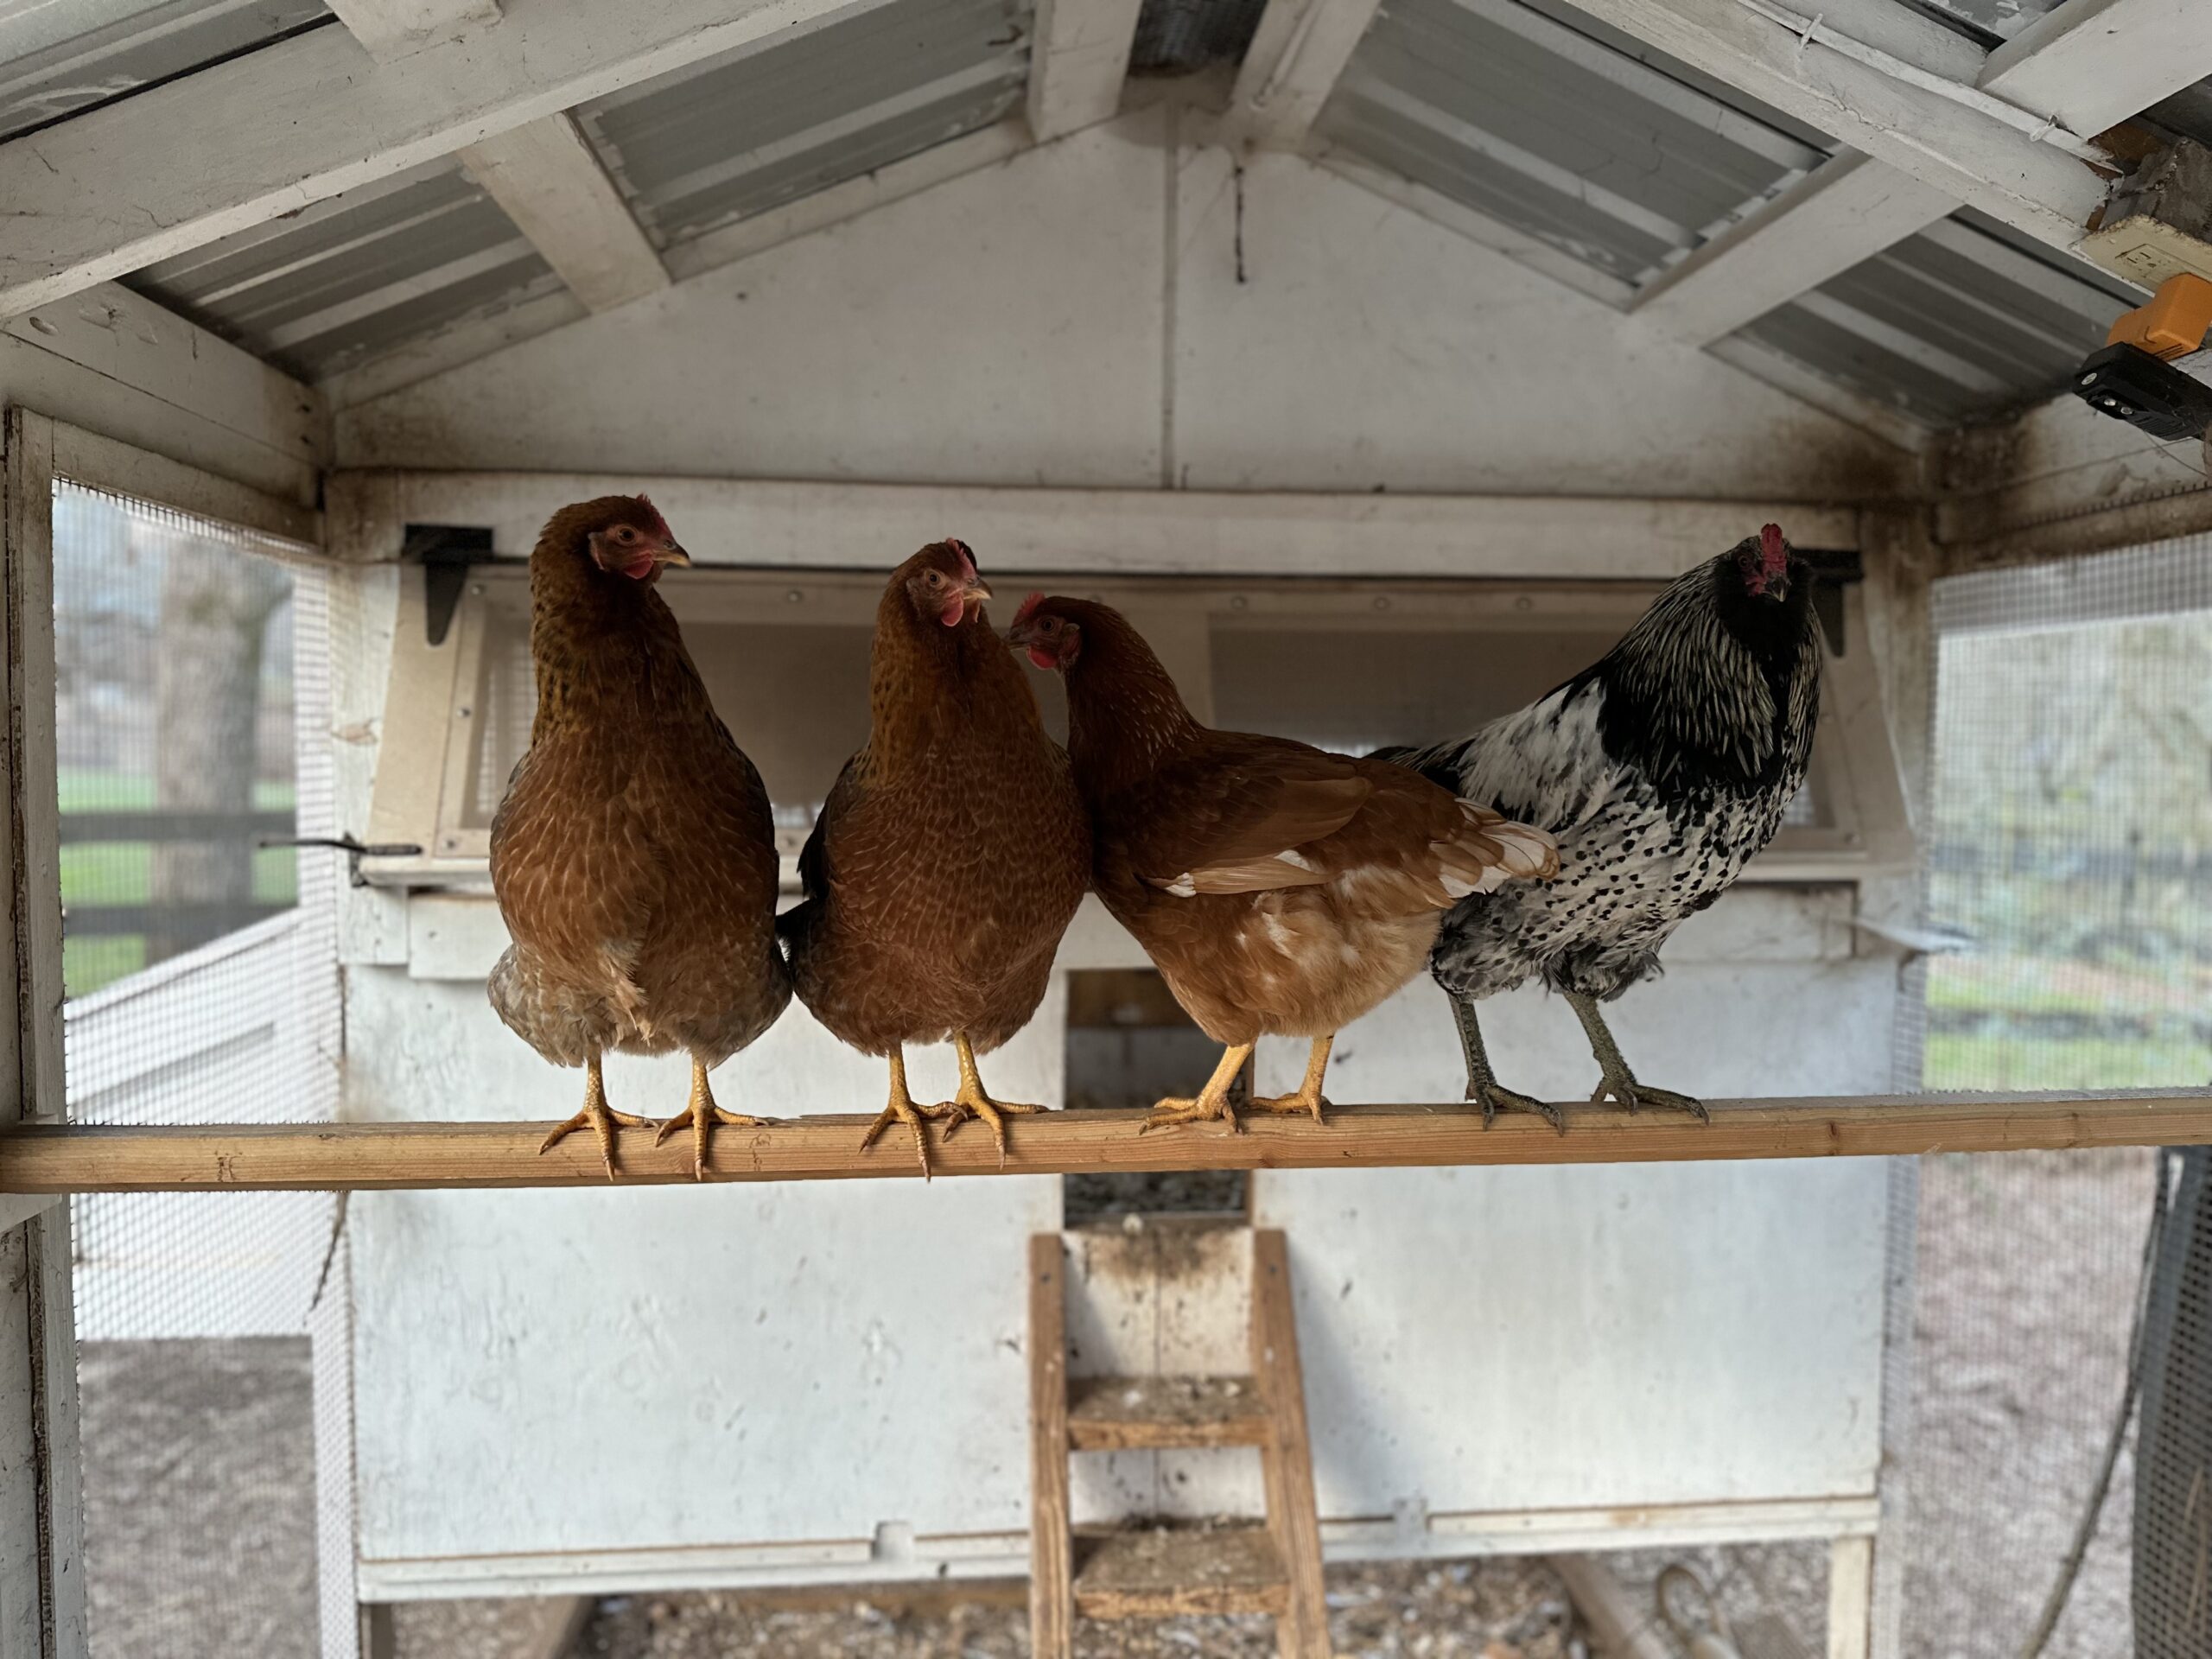 Installing an extra roosting bar in the run is a quick way to extend the coop's capacity.